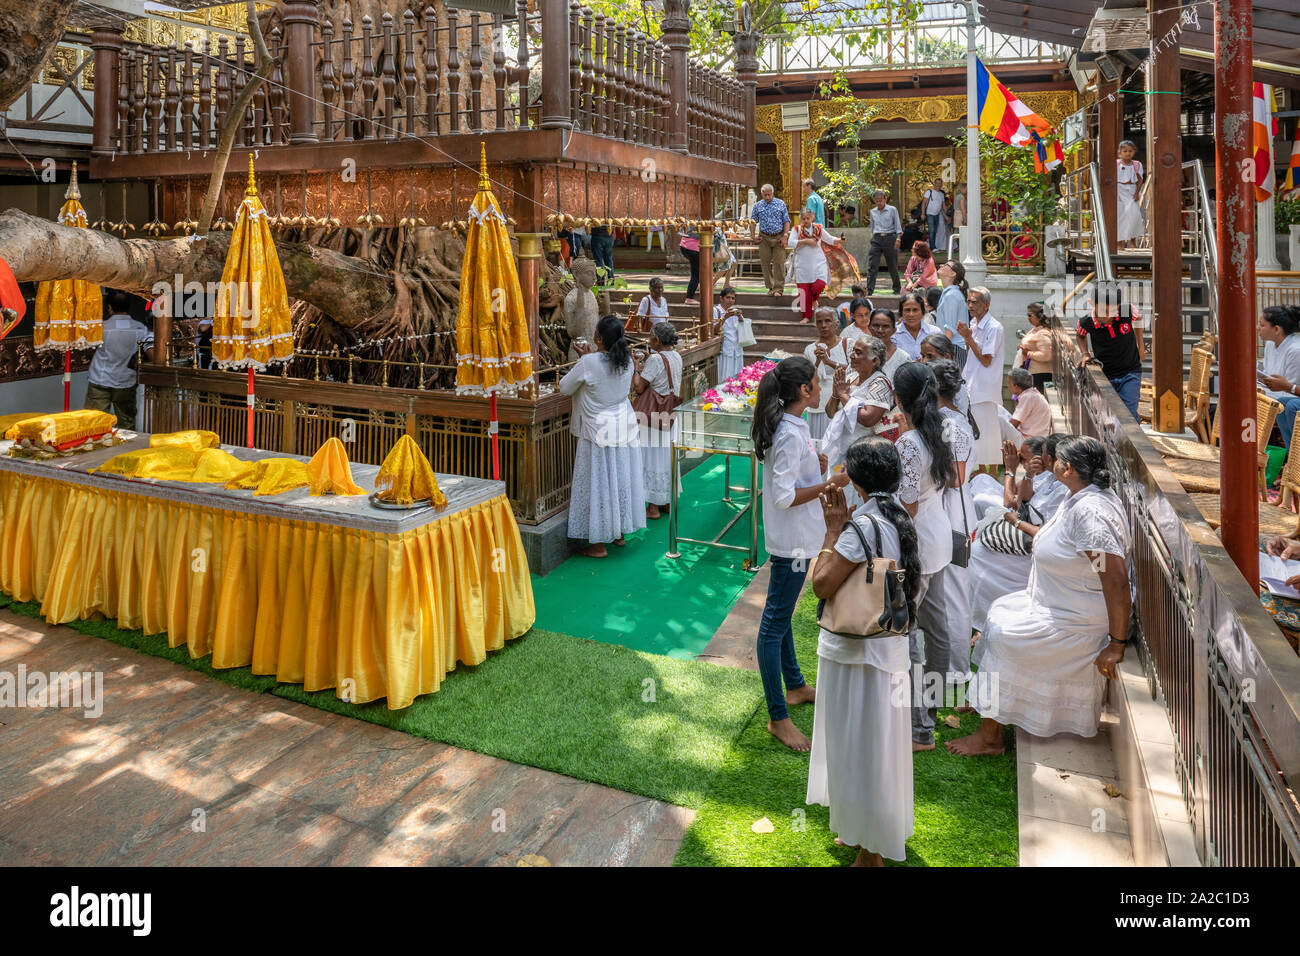 Buddhists lay offerings at the famous Bodhi Tree in Gangaramaya Temple in Colombo, the capital city of Sri Lanka. Stock Photo